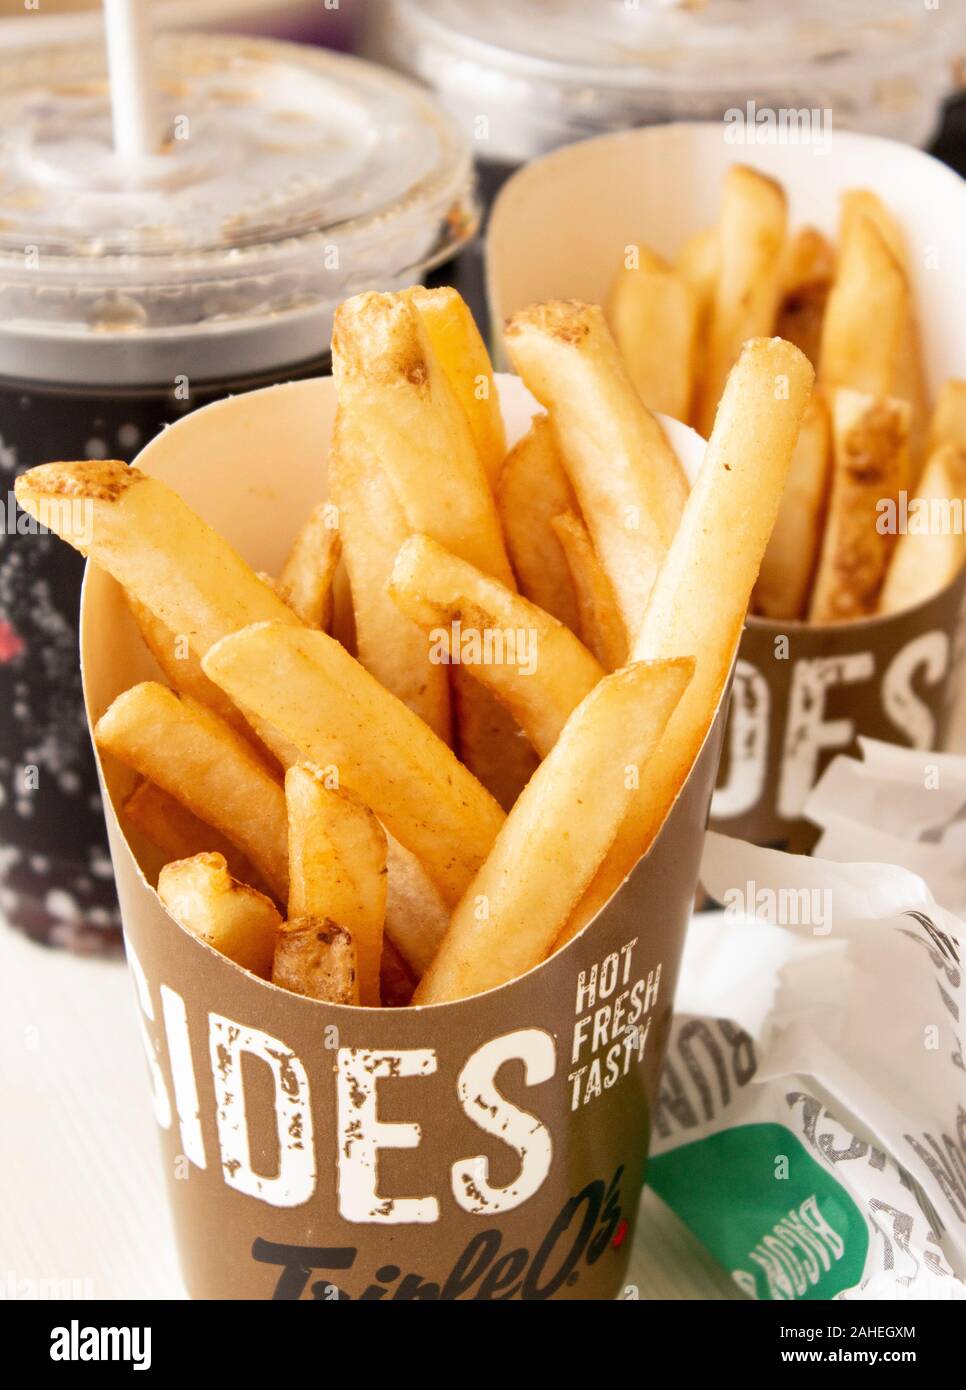 Fire French fries chips and soft drink Stock Photo